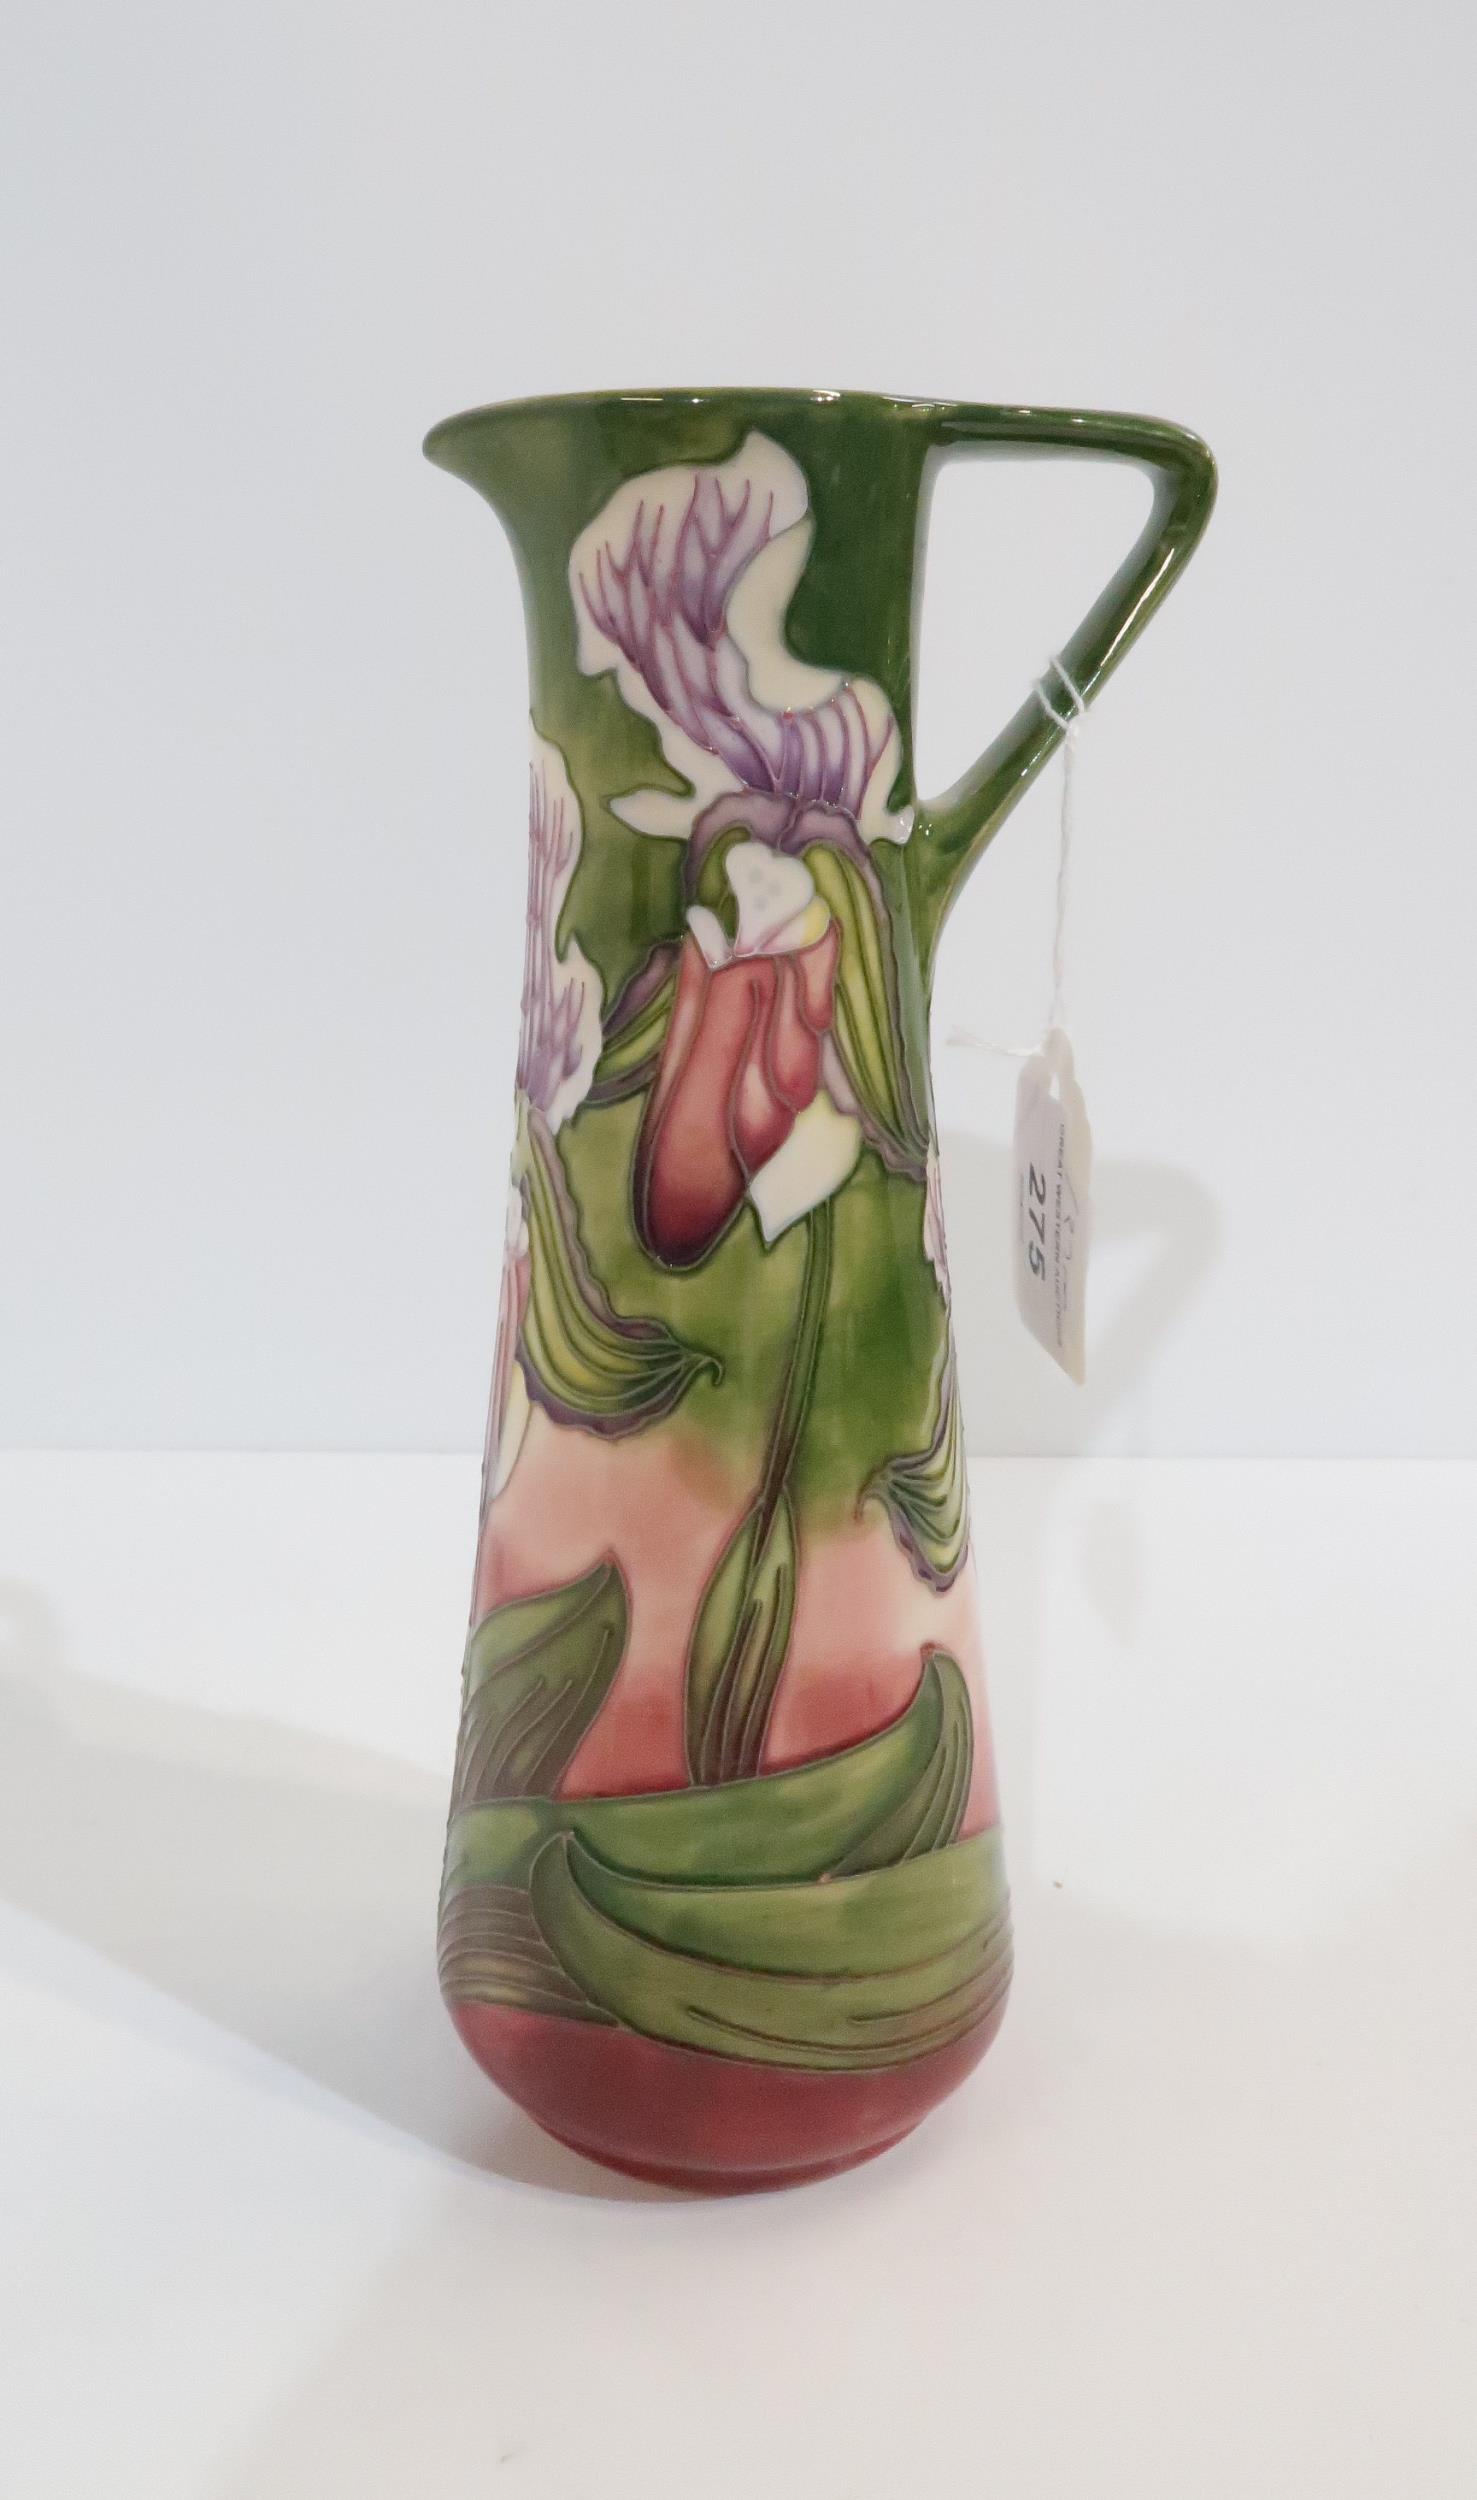 A Limited Edition Moorcroft jug designed by Phillip Gibson in Slipper Orchid pattern Condition